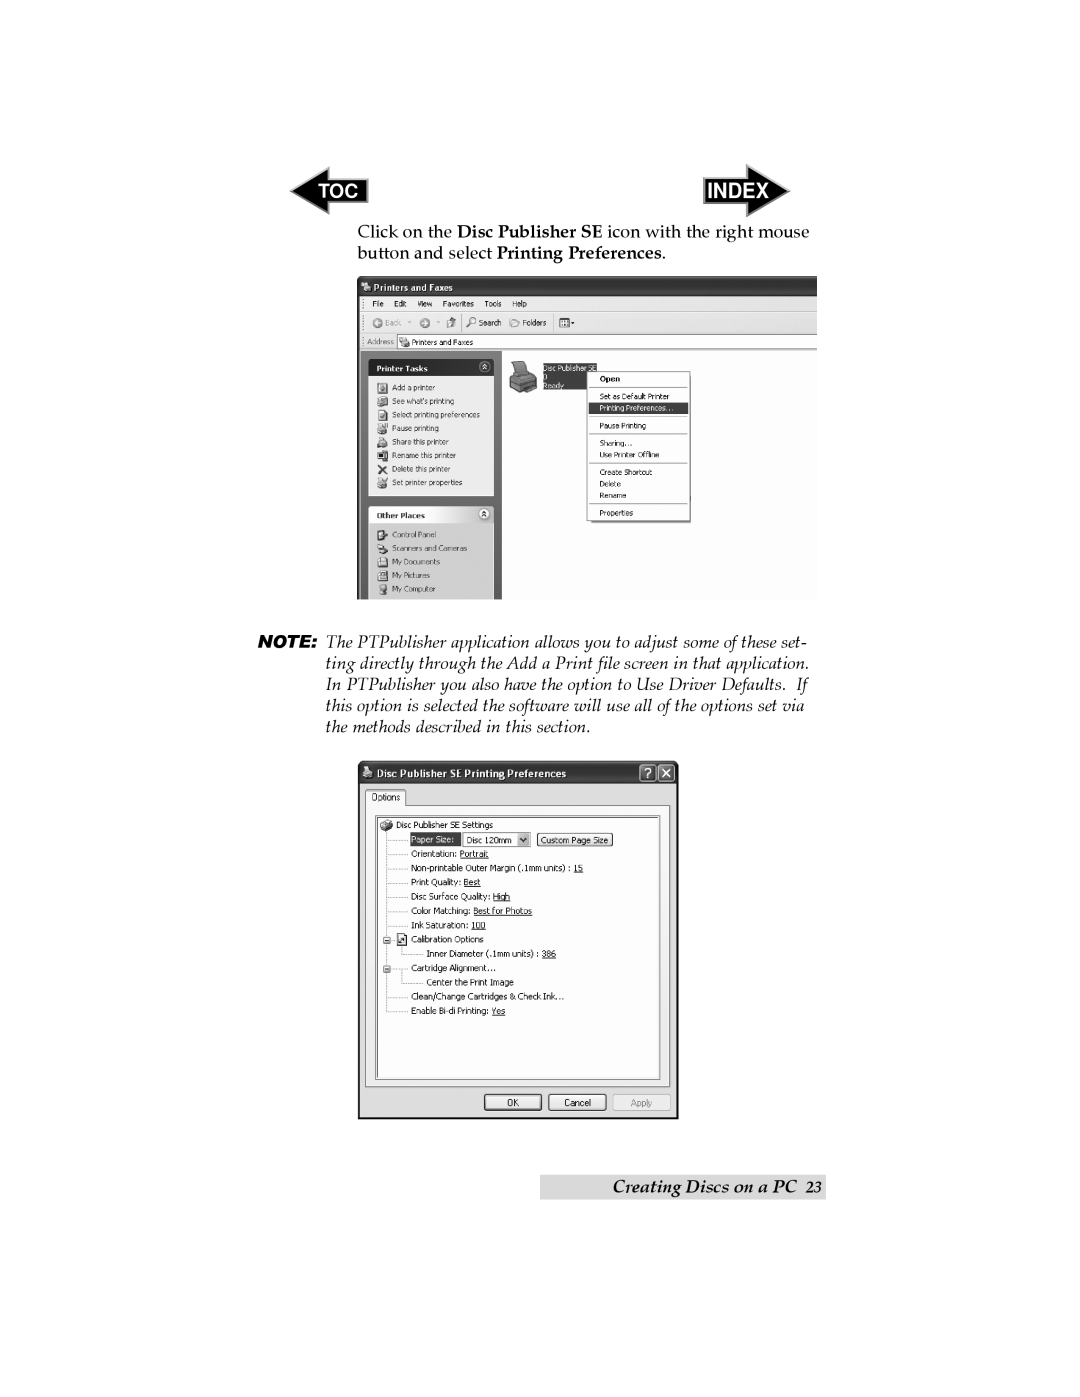 Primera Technology SE user manual Index, Creating Discs on a PC 